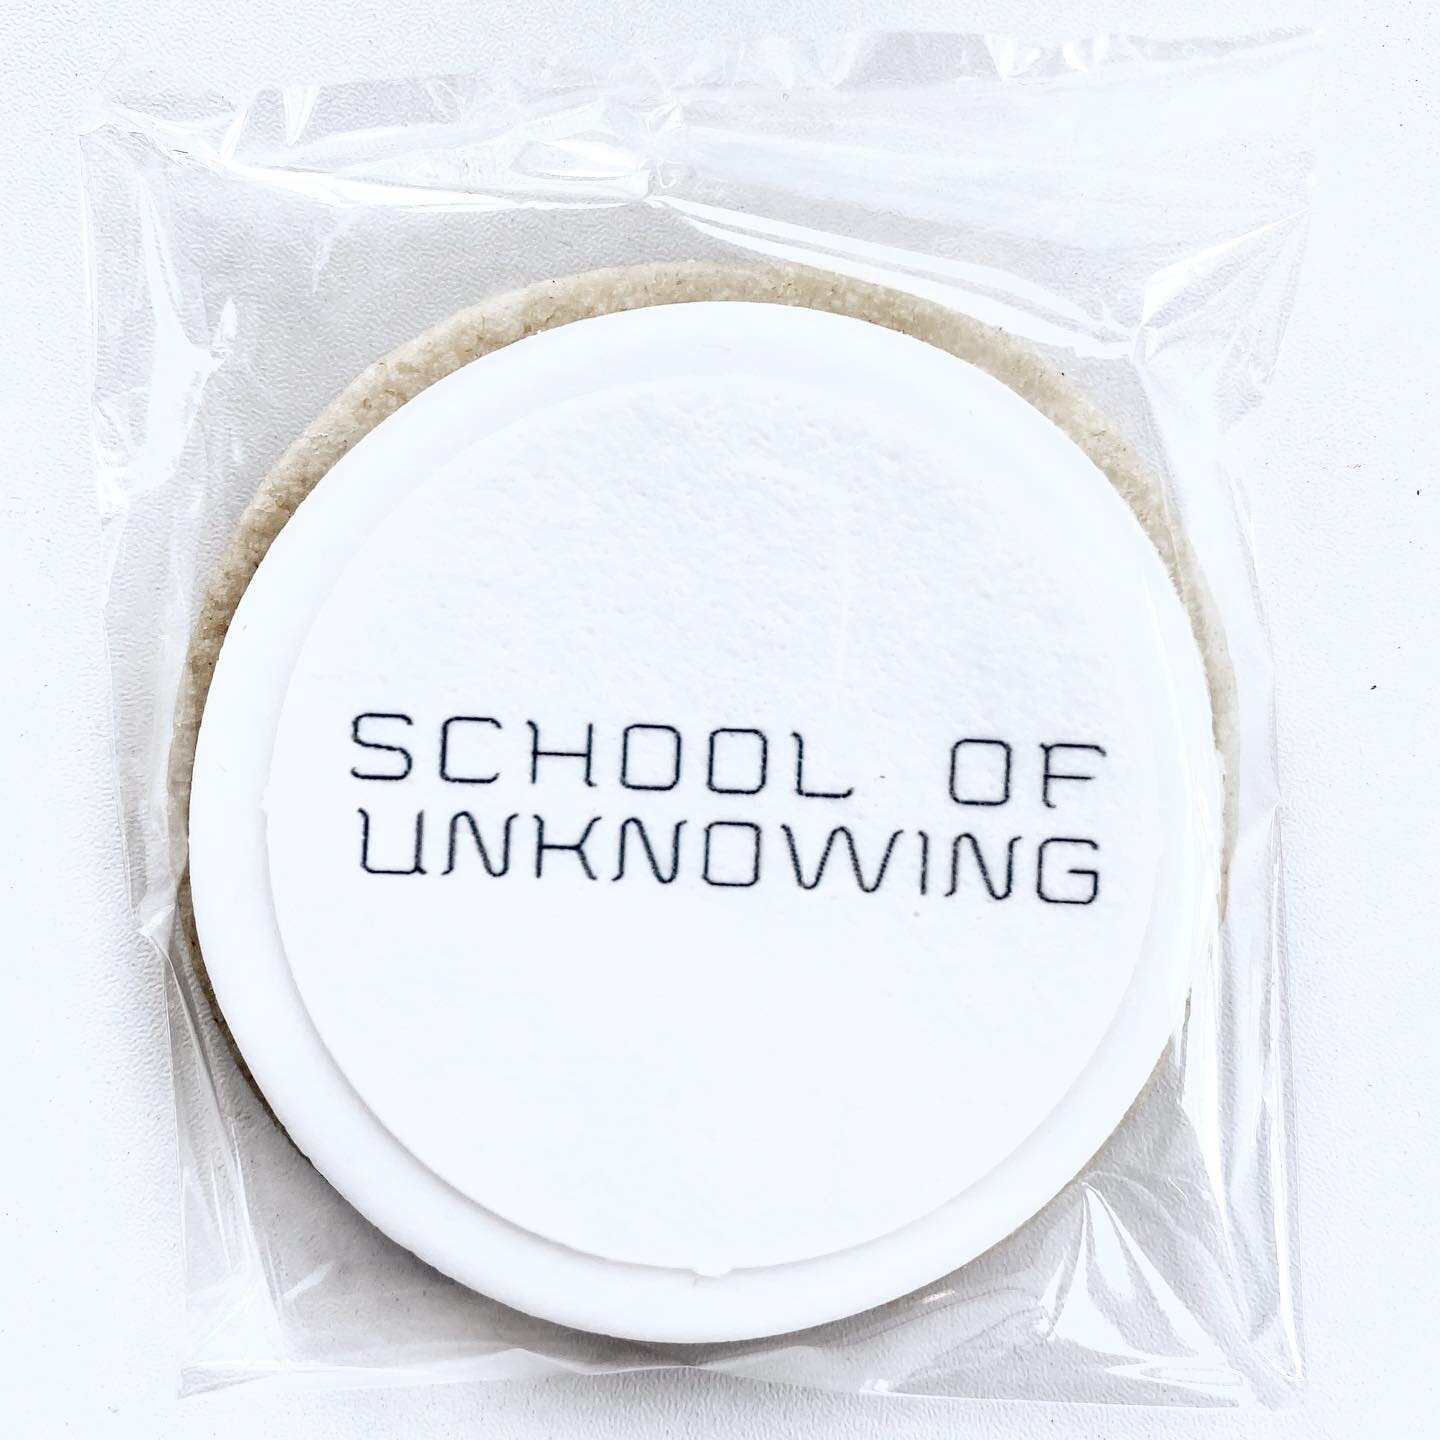 IT IS FINISHED! &mdash; First round of School of Unknowing is complete ✔️ Thank you to the most amazing cohort of creative thinkers who joined me for this online adventure exploring all sorts of amazing processes and ways of seeing - you guys nailed 